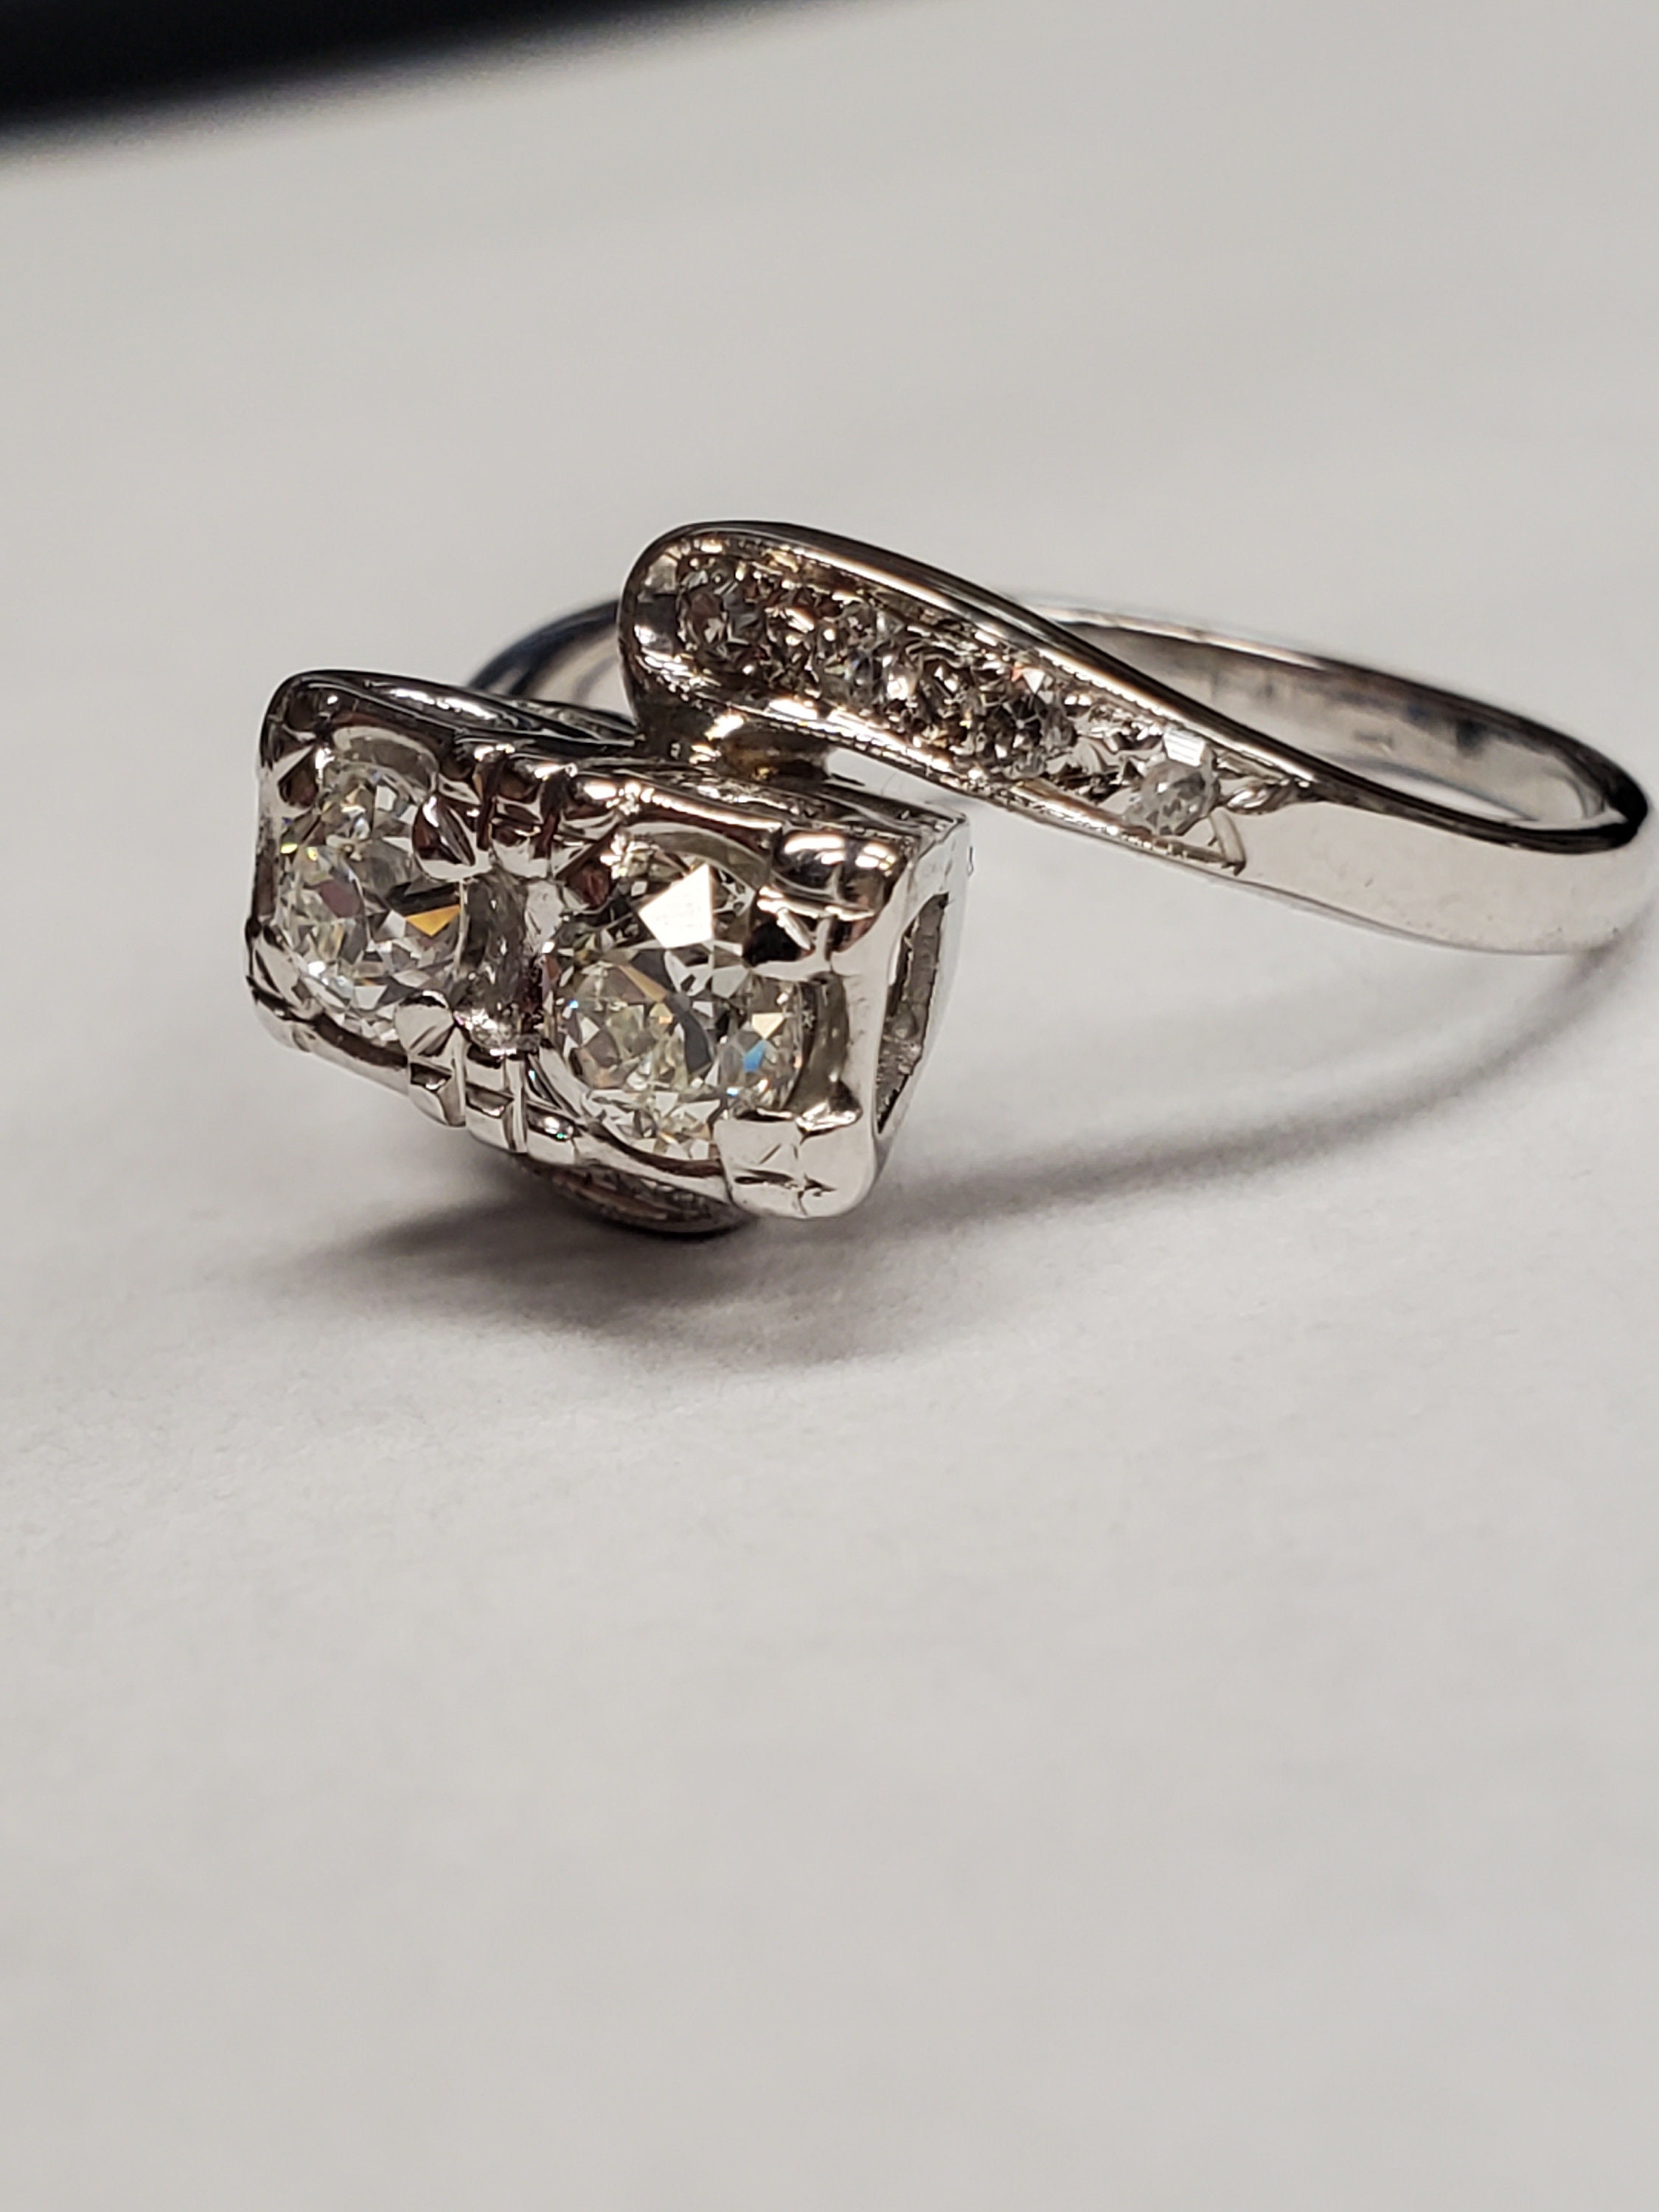 Product Image for Moi et Toi Vintage .75cttw Old European Cut bypass diamond ring Size 9.5